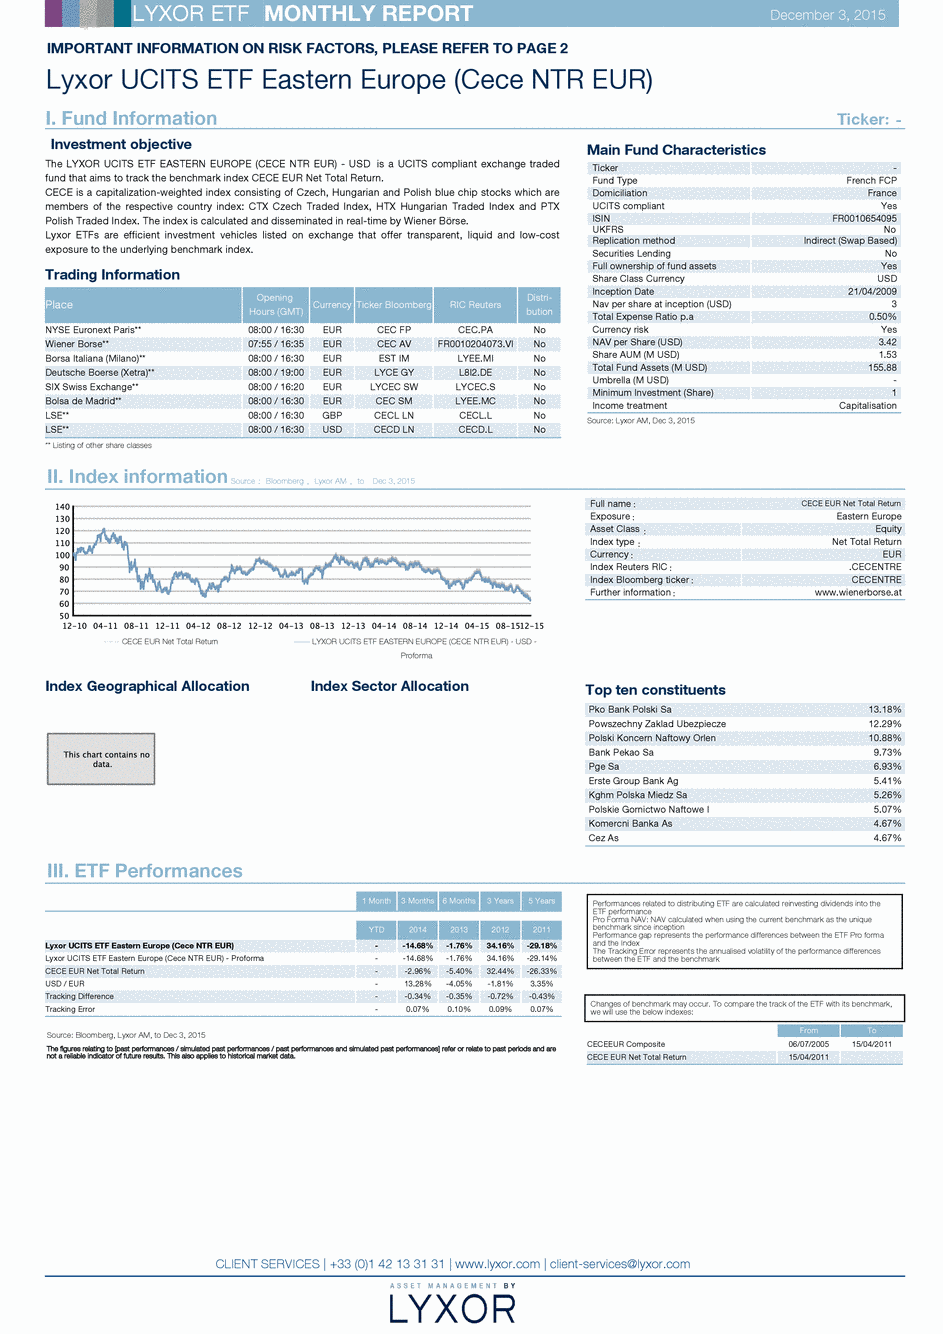 Reporting LYXOR UCITS ETF EASTERN EUROPE (CECE NTR EUR) USD - 03/12/2015 - Anglais